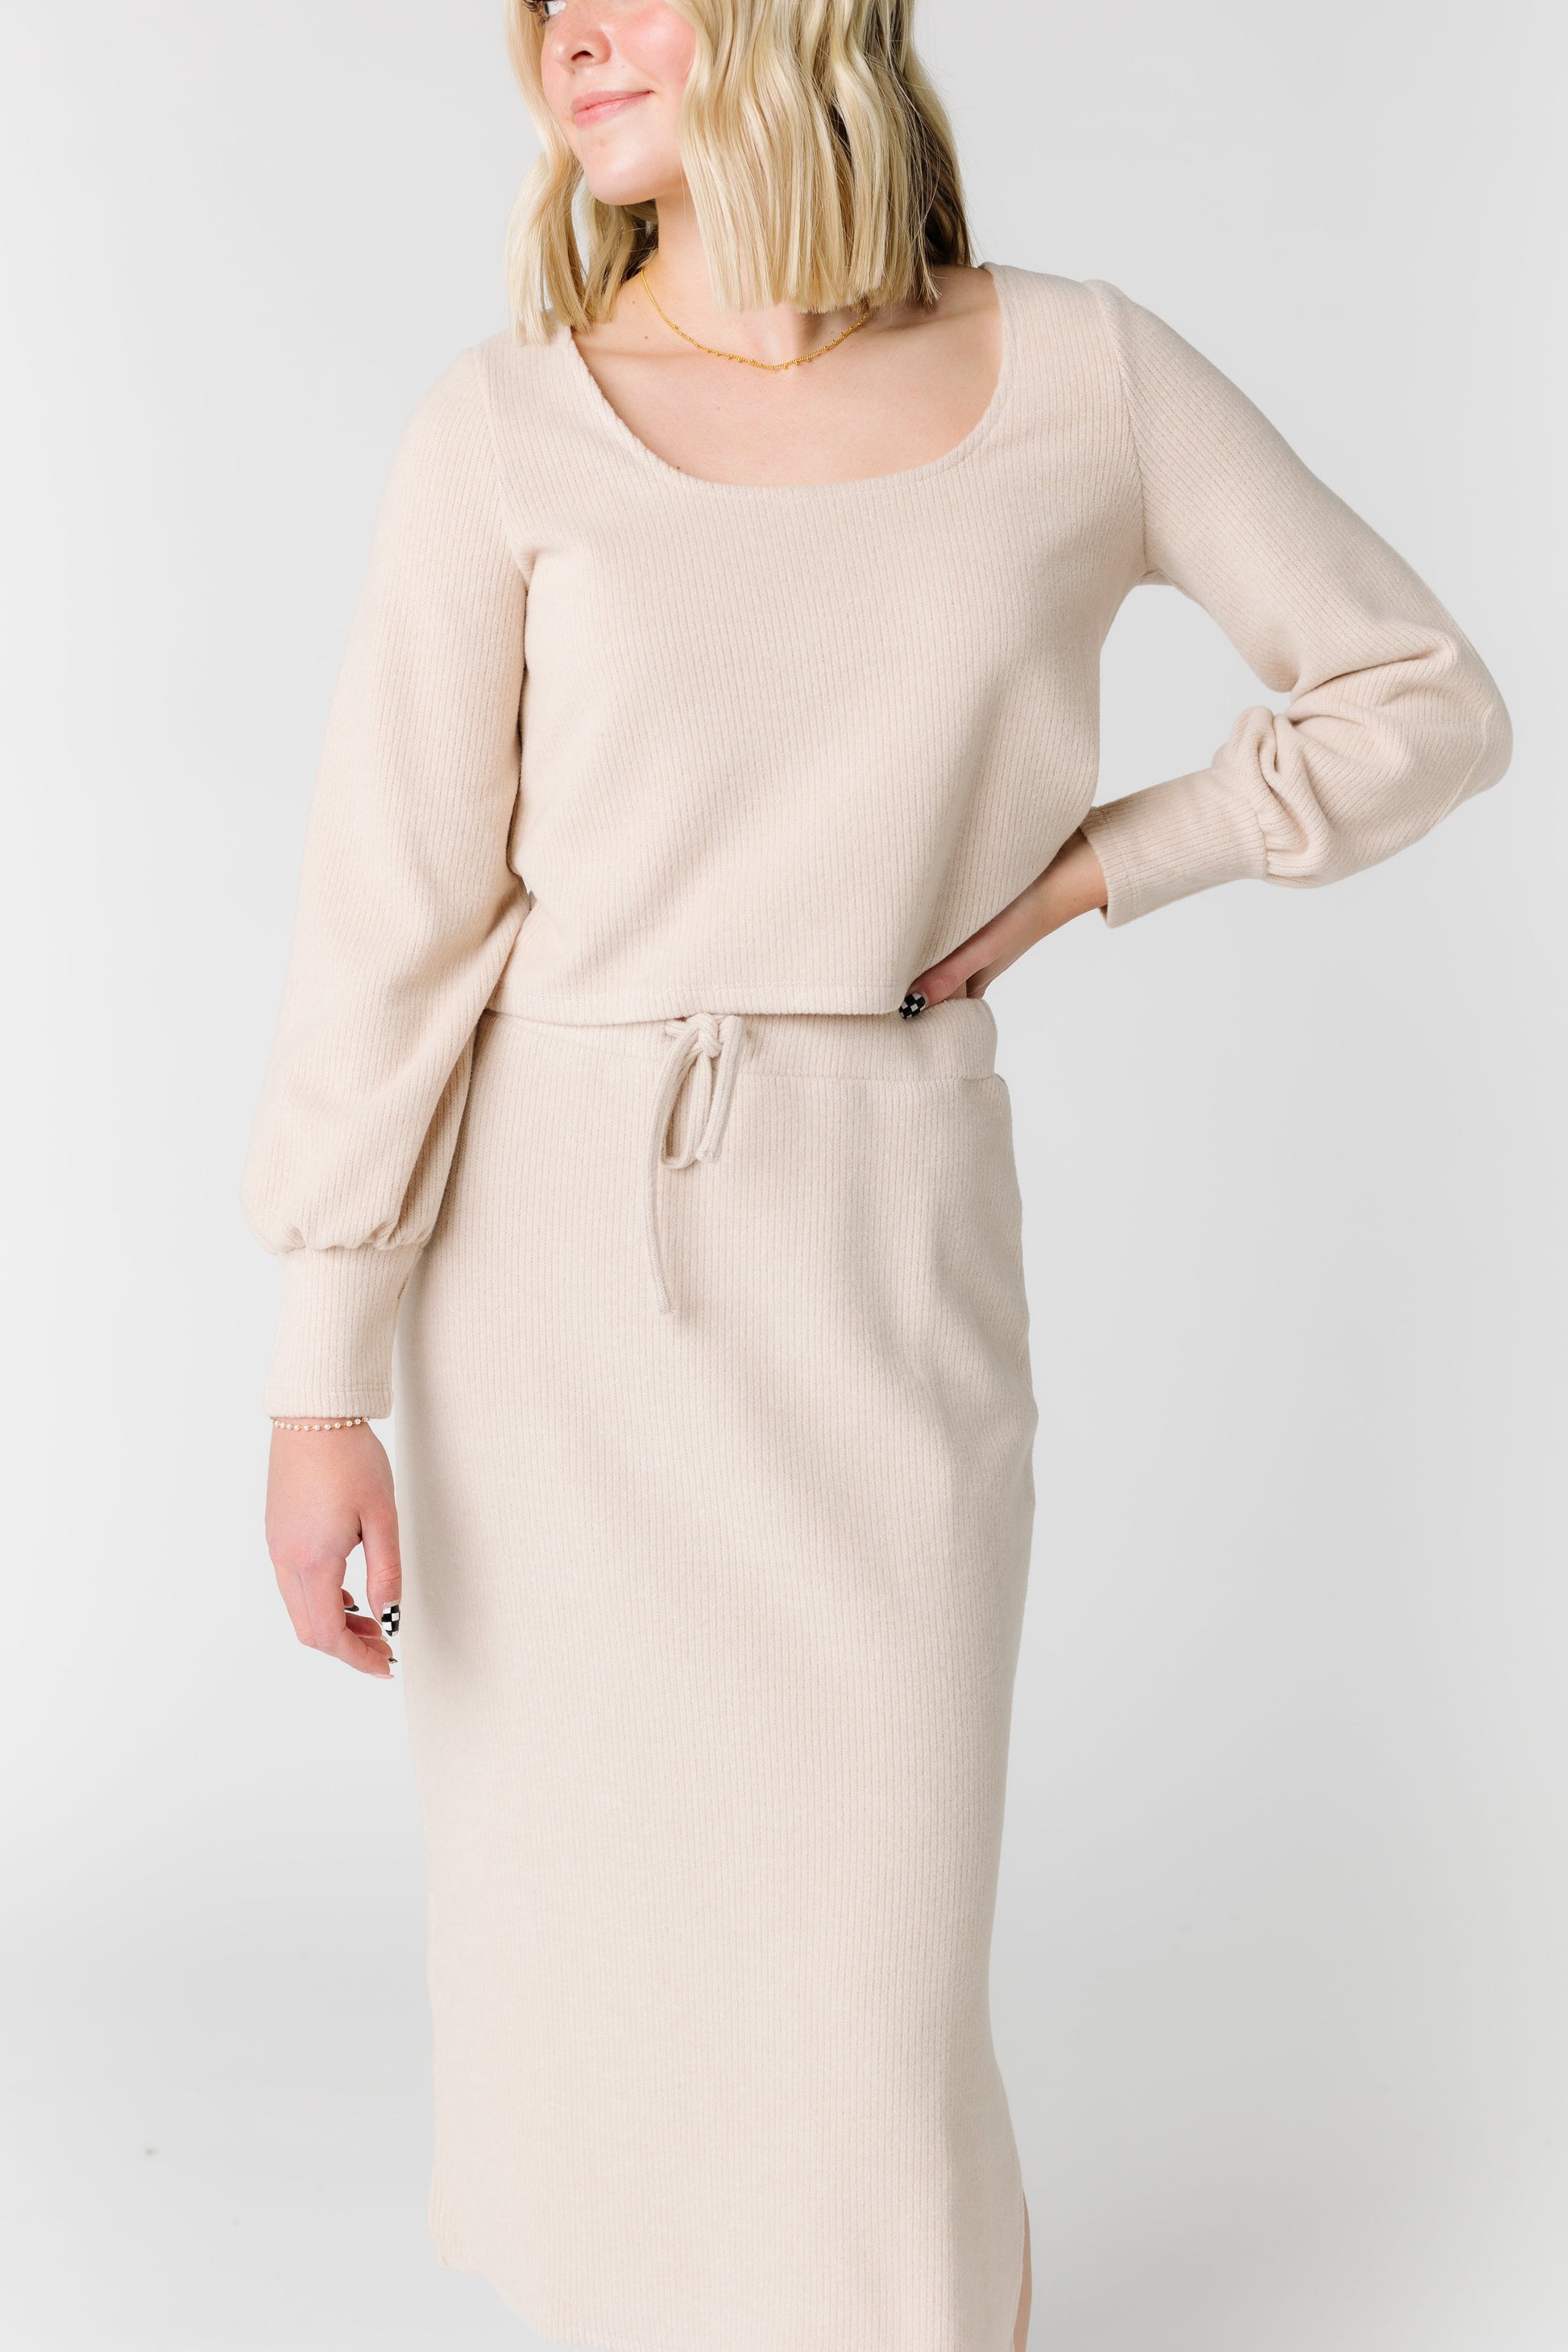 Ribbed Sweater Set - Top WOMEN'S TOP brass & roe 